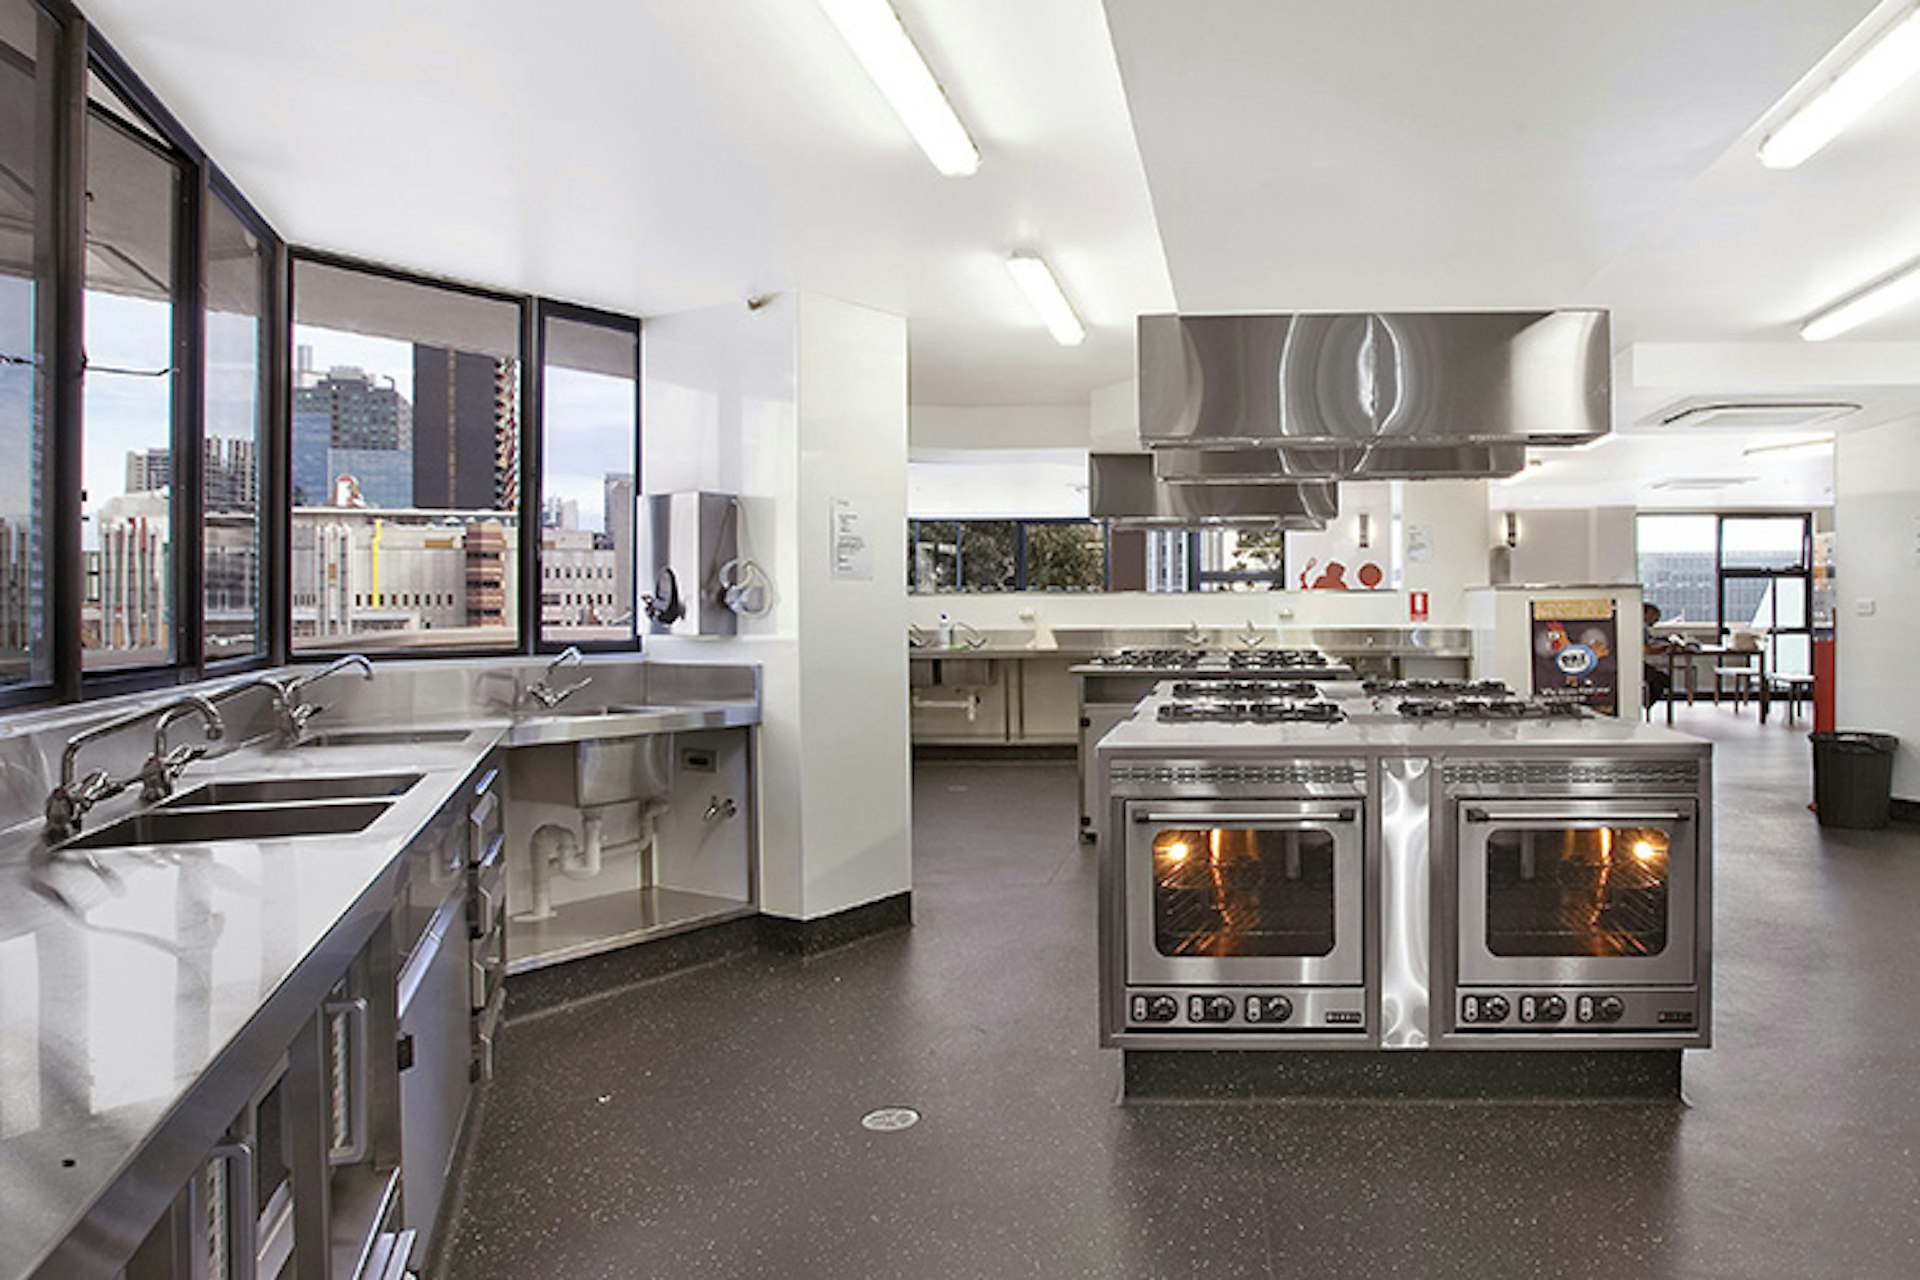 Sharing an old-school hostel's sole, soup-splattered microwave is a distant memory in the gleaming kitchen of Melbourne's Space Hotel. Image courtesy of The Space Hotel.